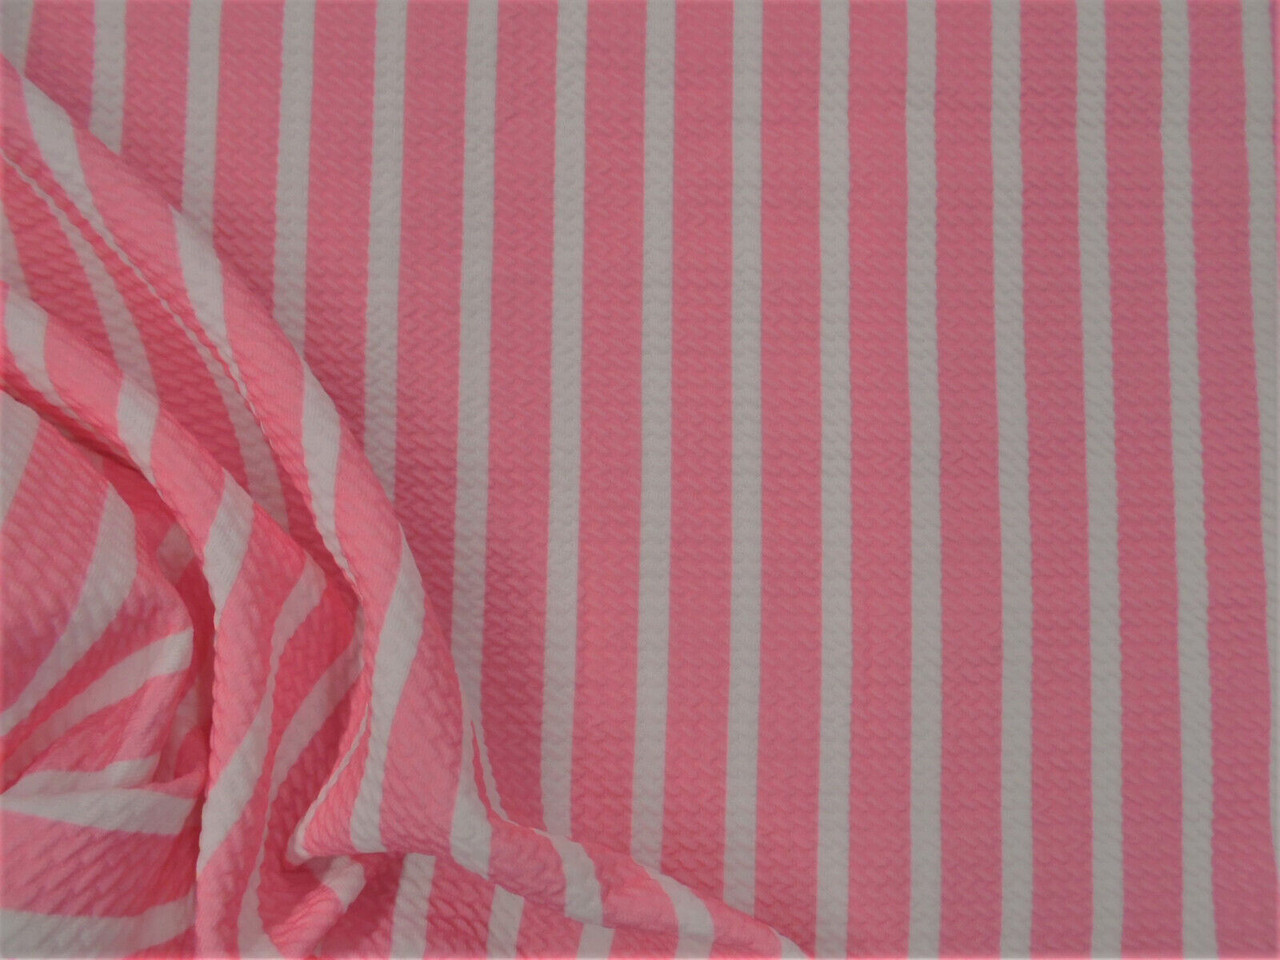 Bullet Printed Liverpool Textured Fabric 4 way Stretch Pink White Stripe W25